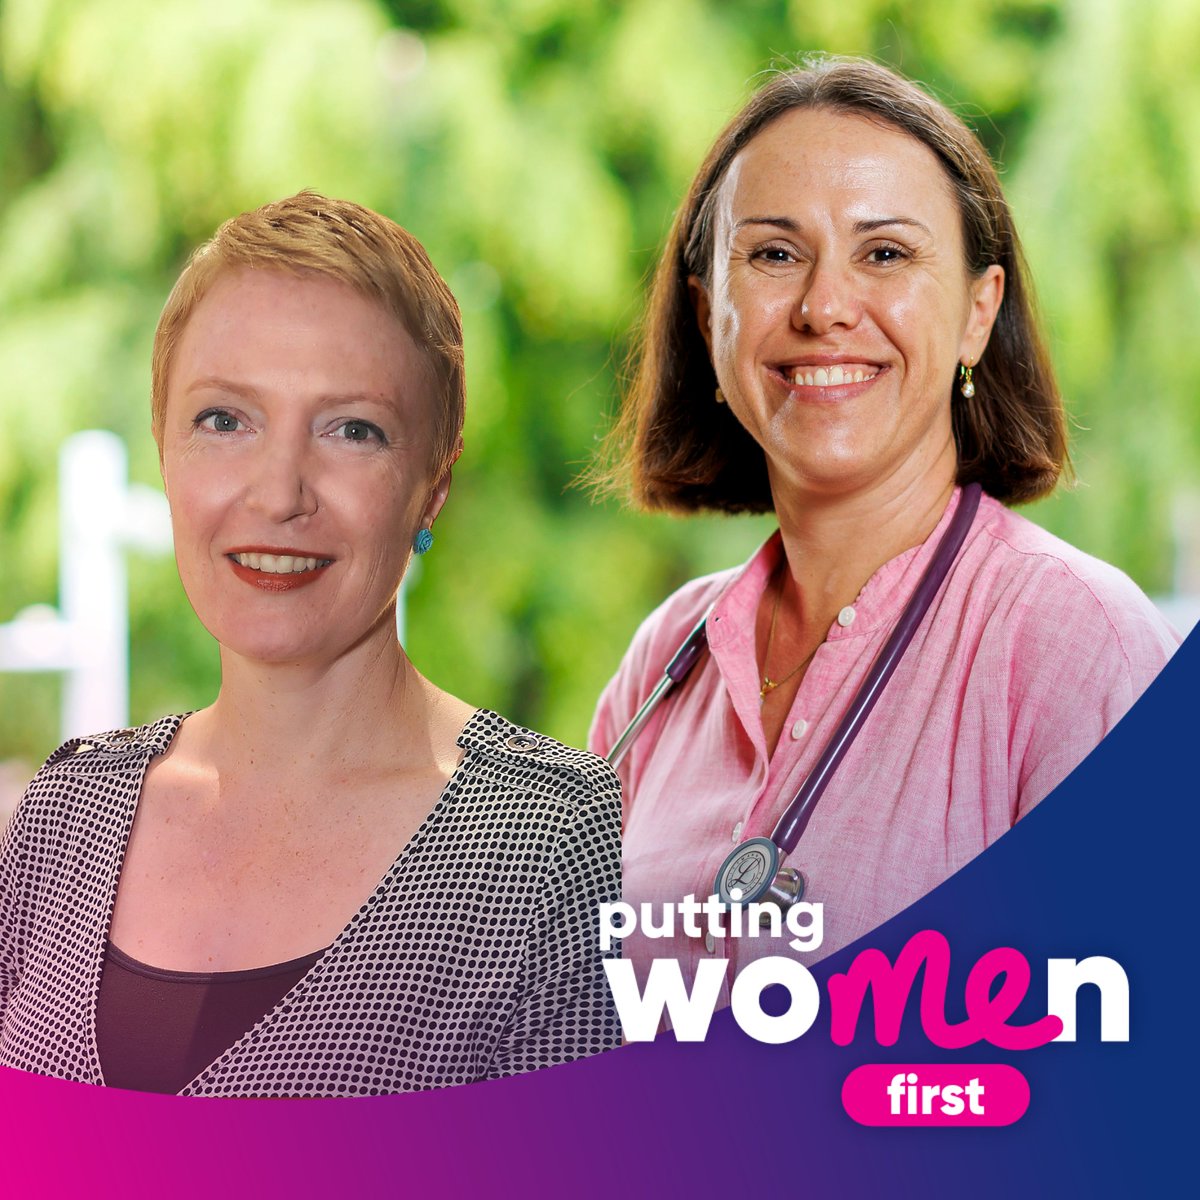 Mater Researcher A/Prof Shelley Wilkinson and Director of Obstetric Medicine at Mater Mothers’ Hospital Dr Jo Laurie are radically redesigning the gesational diabetes service at Mater Mothers' Hospital to be: 🤰 woman-focussed and 📱 digitally-supported lnkd.in/gcf3YnXx